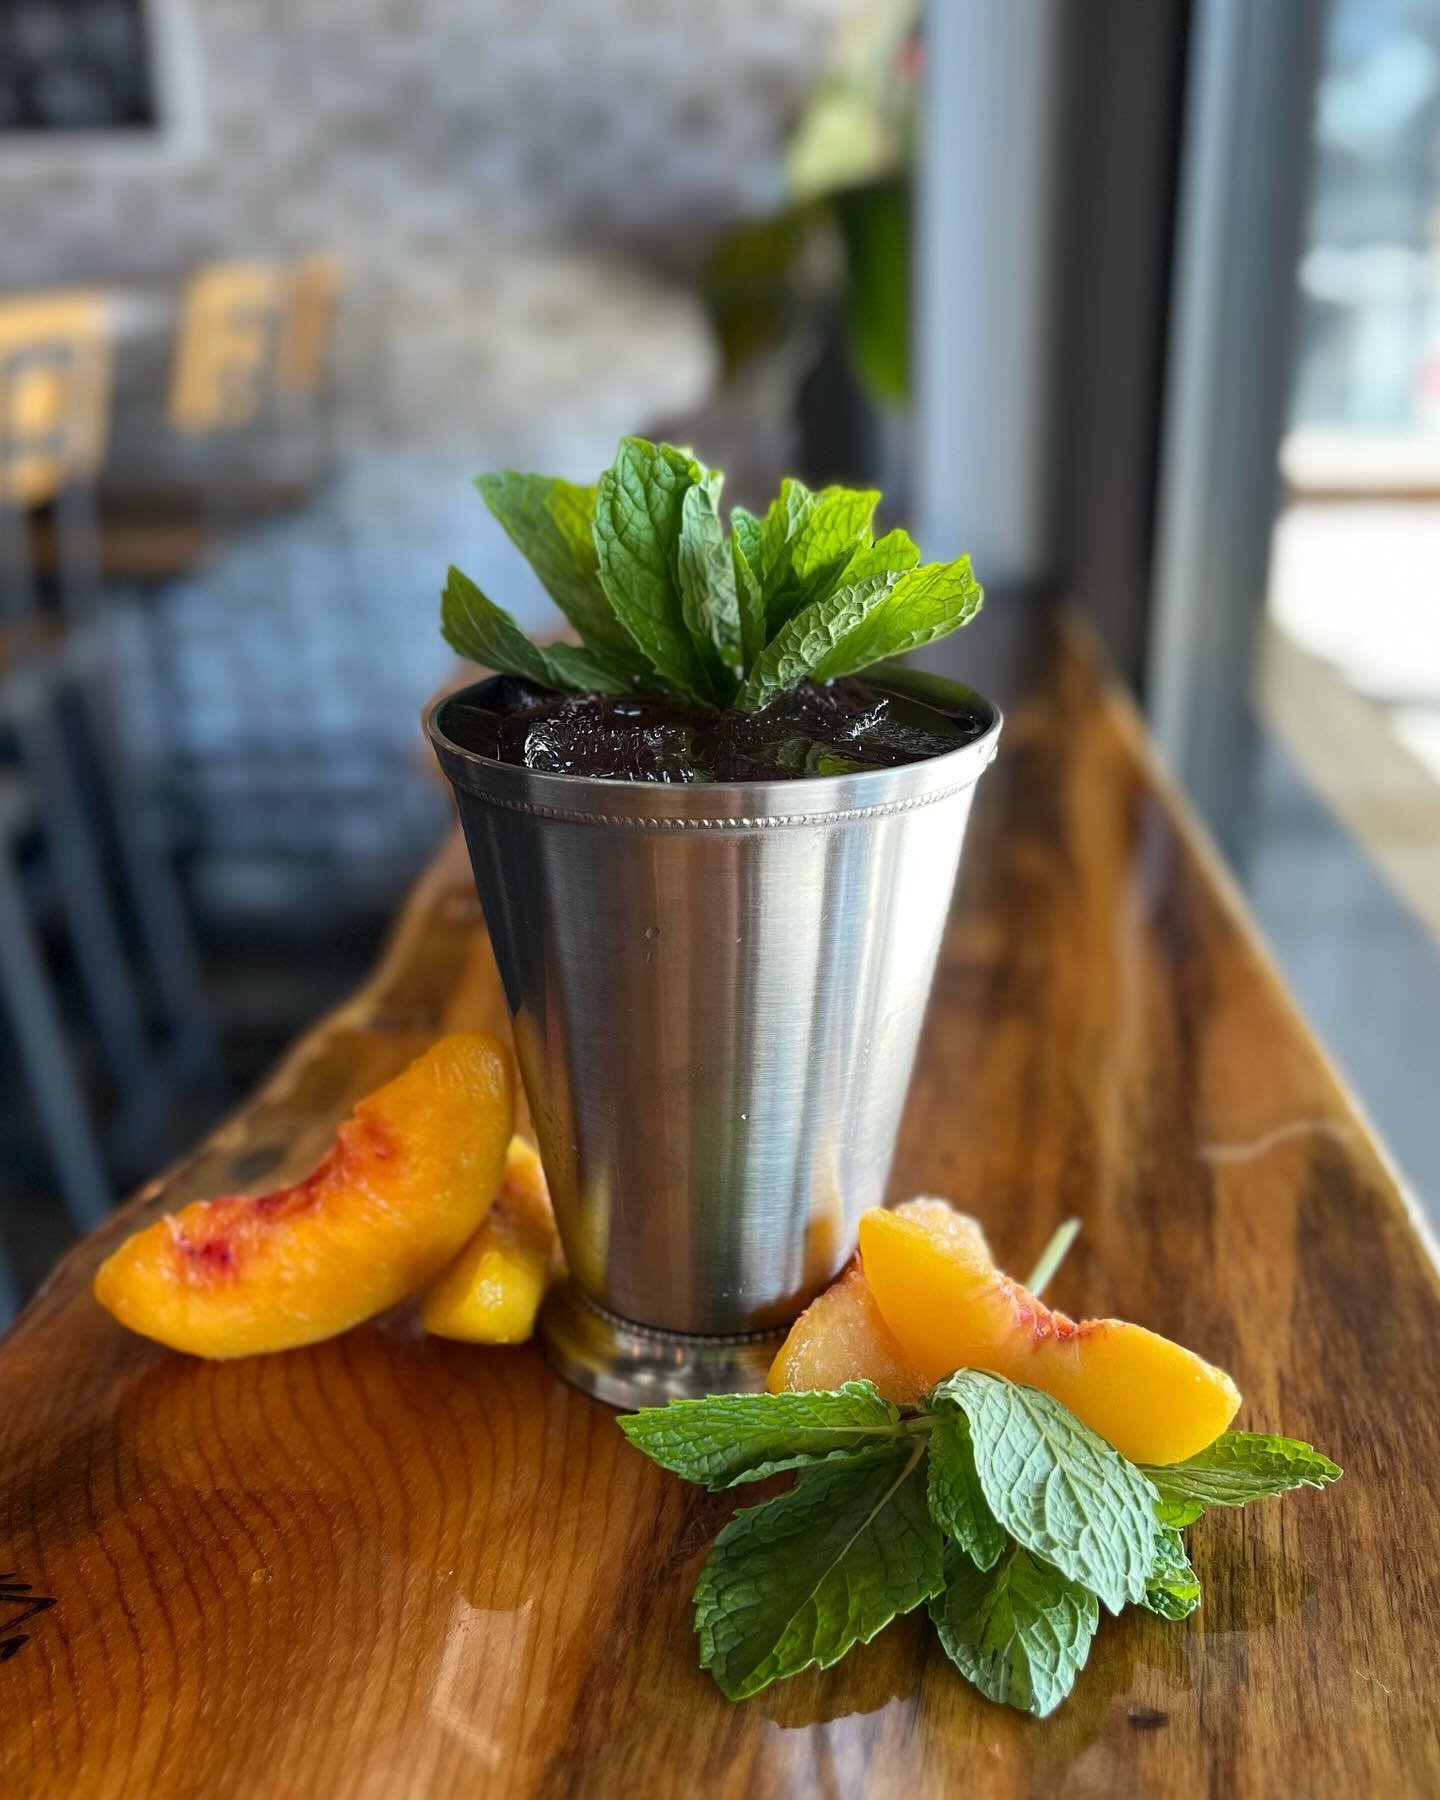 Doing our part in celebrating the 150 years of the Kentucky Derby! 🏇👒💐 Stop by this weekend to raise a glass to your favorite horse! Vote for who you think is going to win, below! ⬇️

📸: Peach Mint Julep: Straight Bourbon Whiskey &bull; lemon &bu